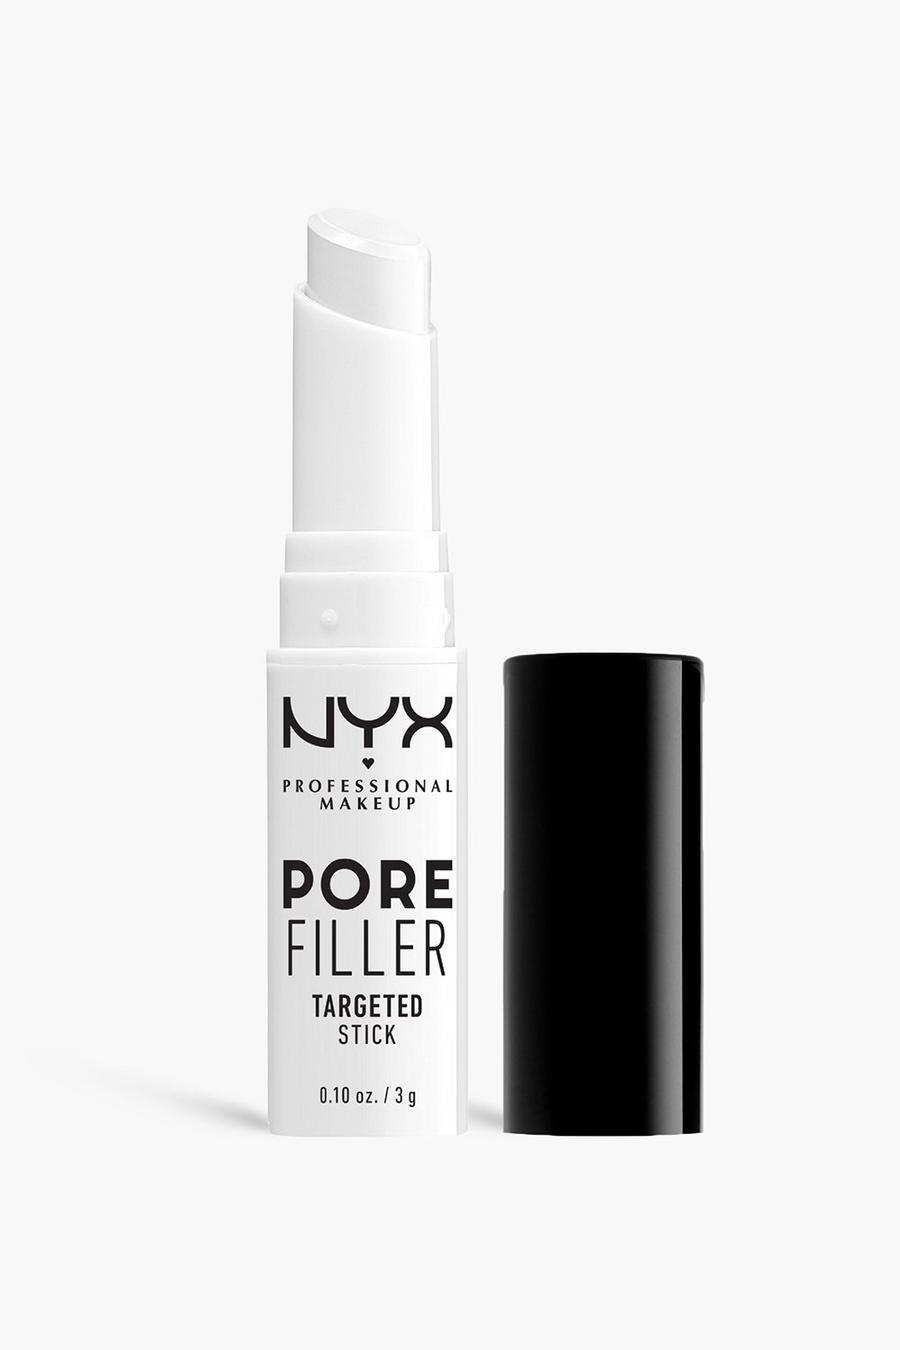 Clear clair NYX Professional Makeup Blurring Vitamin E Infused Pore Filler Face Primer Stick